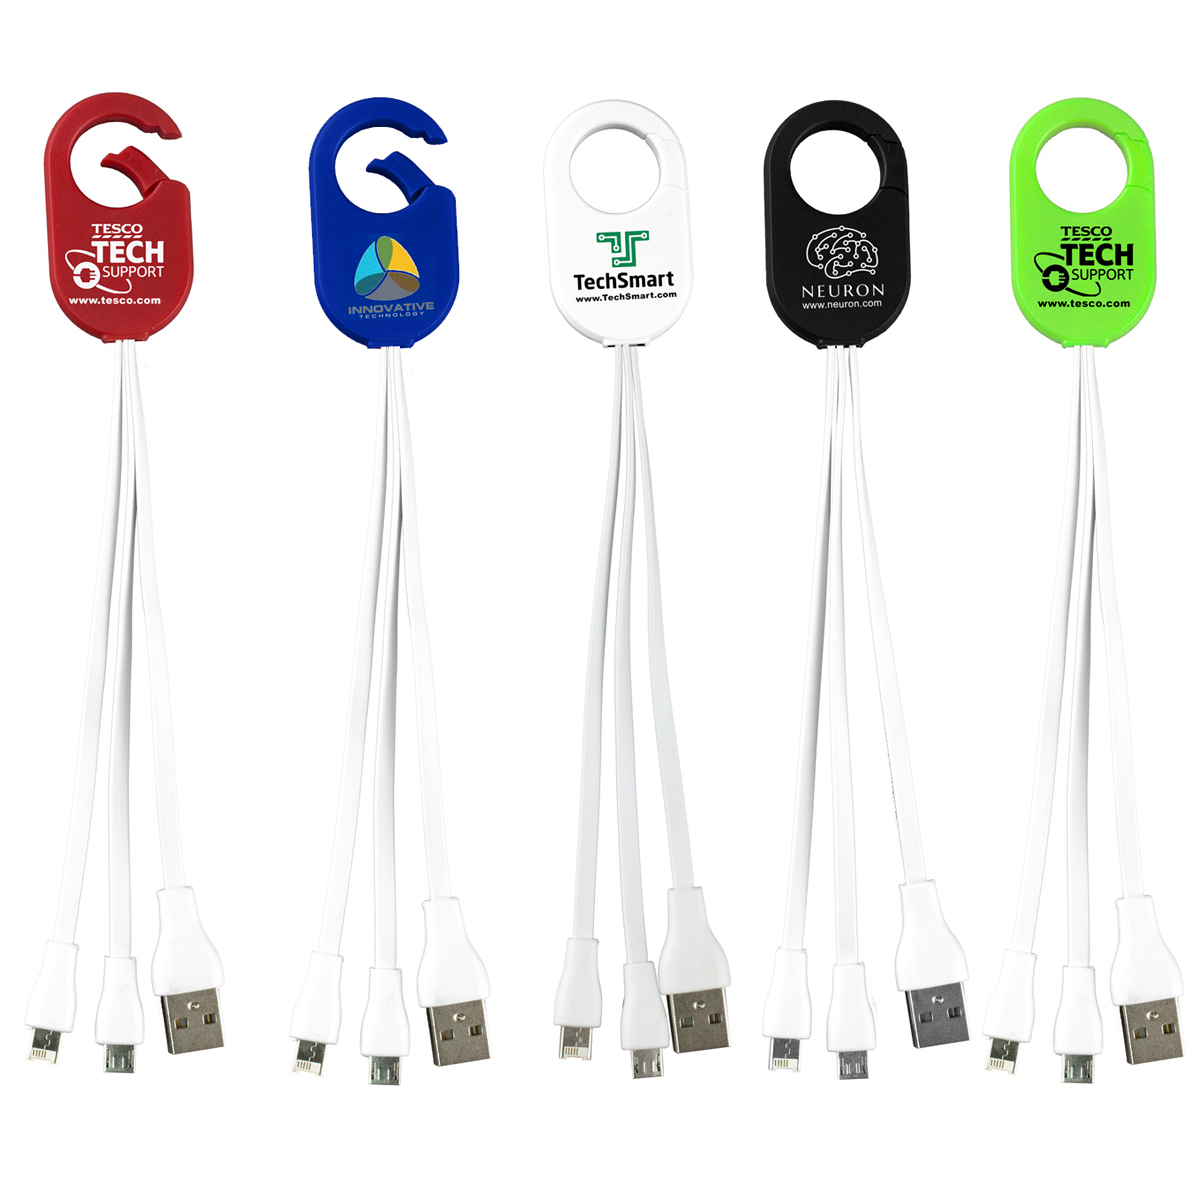 "Weber" 5-in-1 Cell Phone Charging Cable with Type C Adapter and Carabiner Type Spring Clip